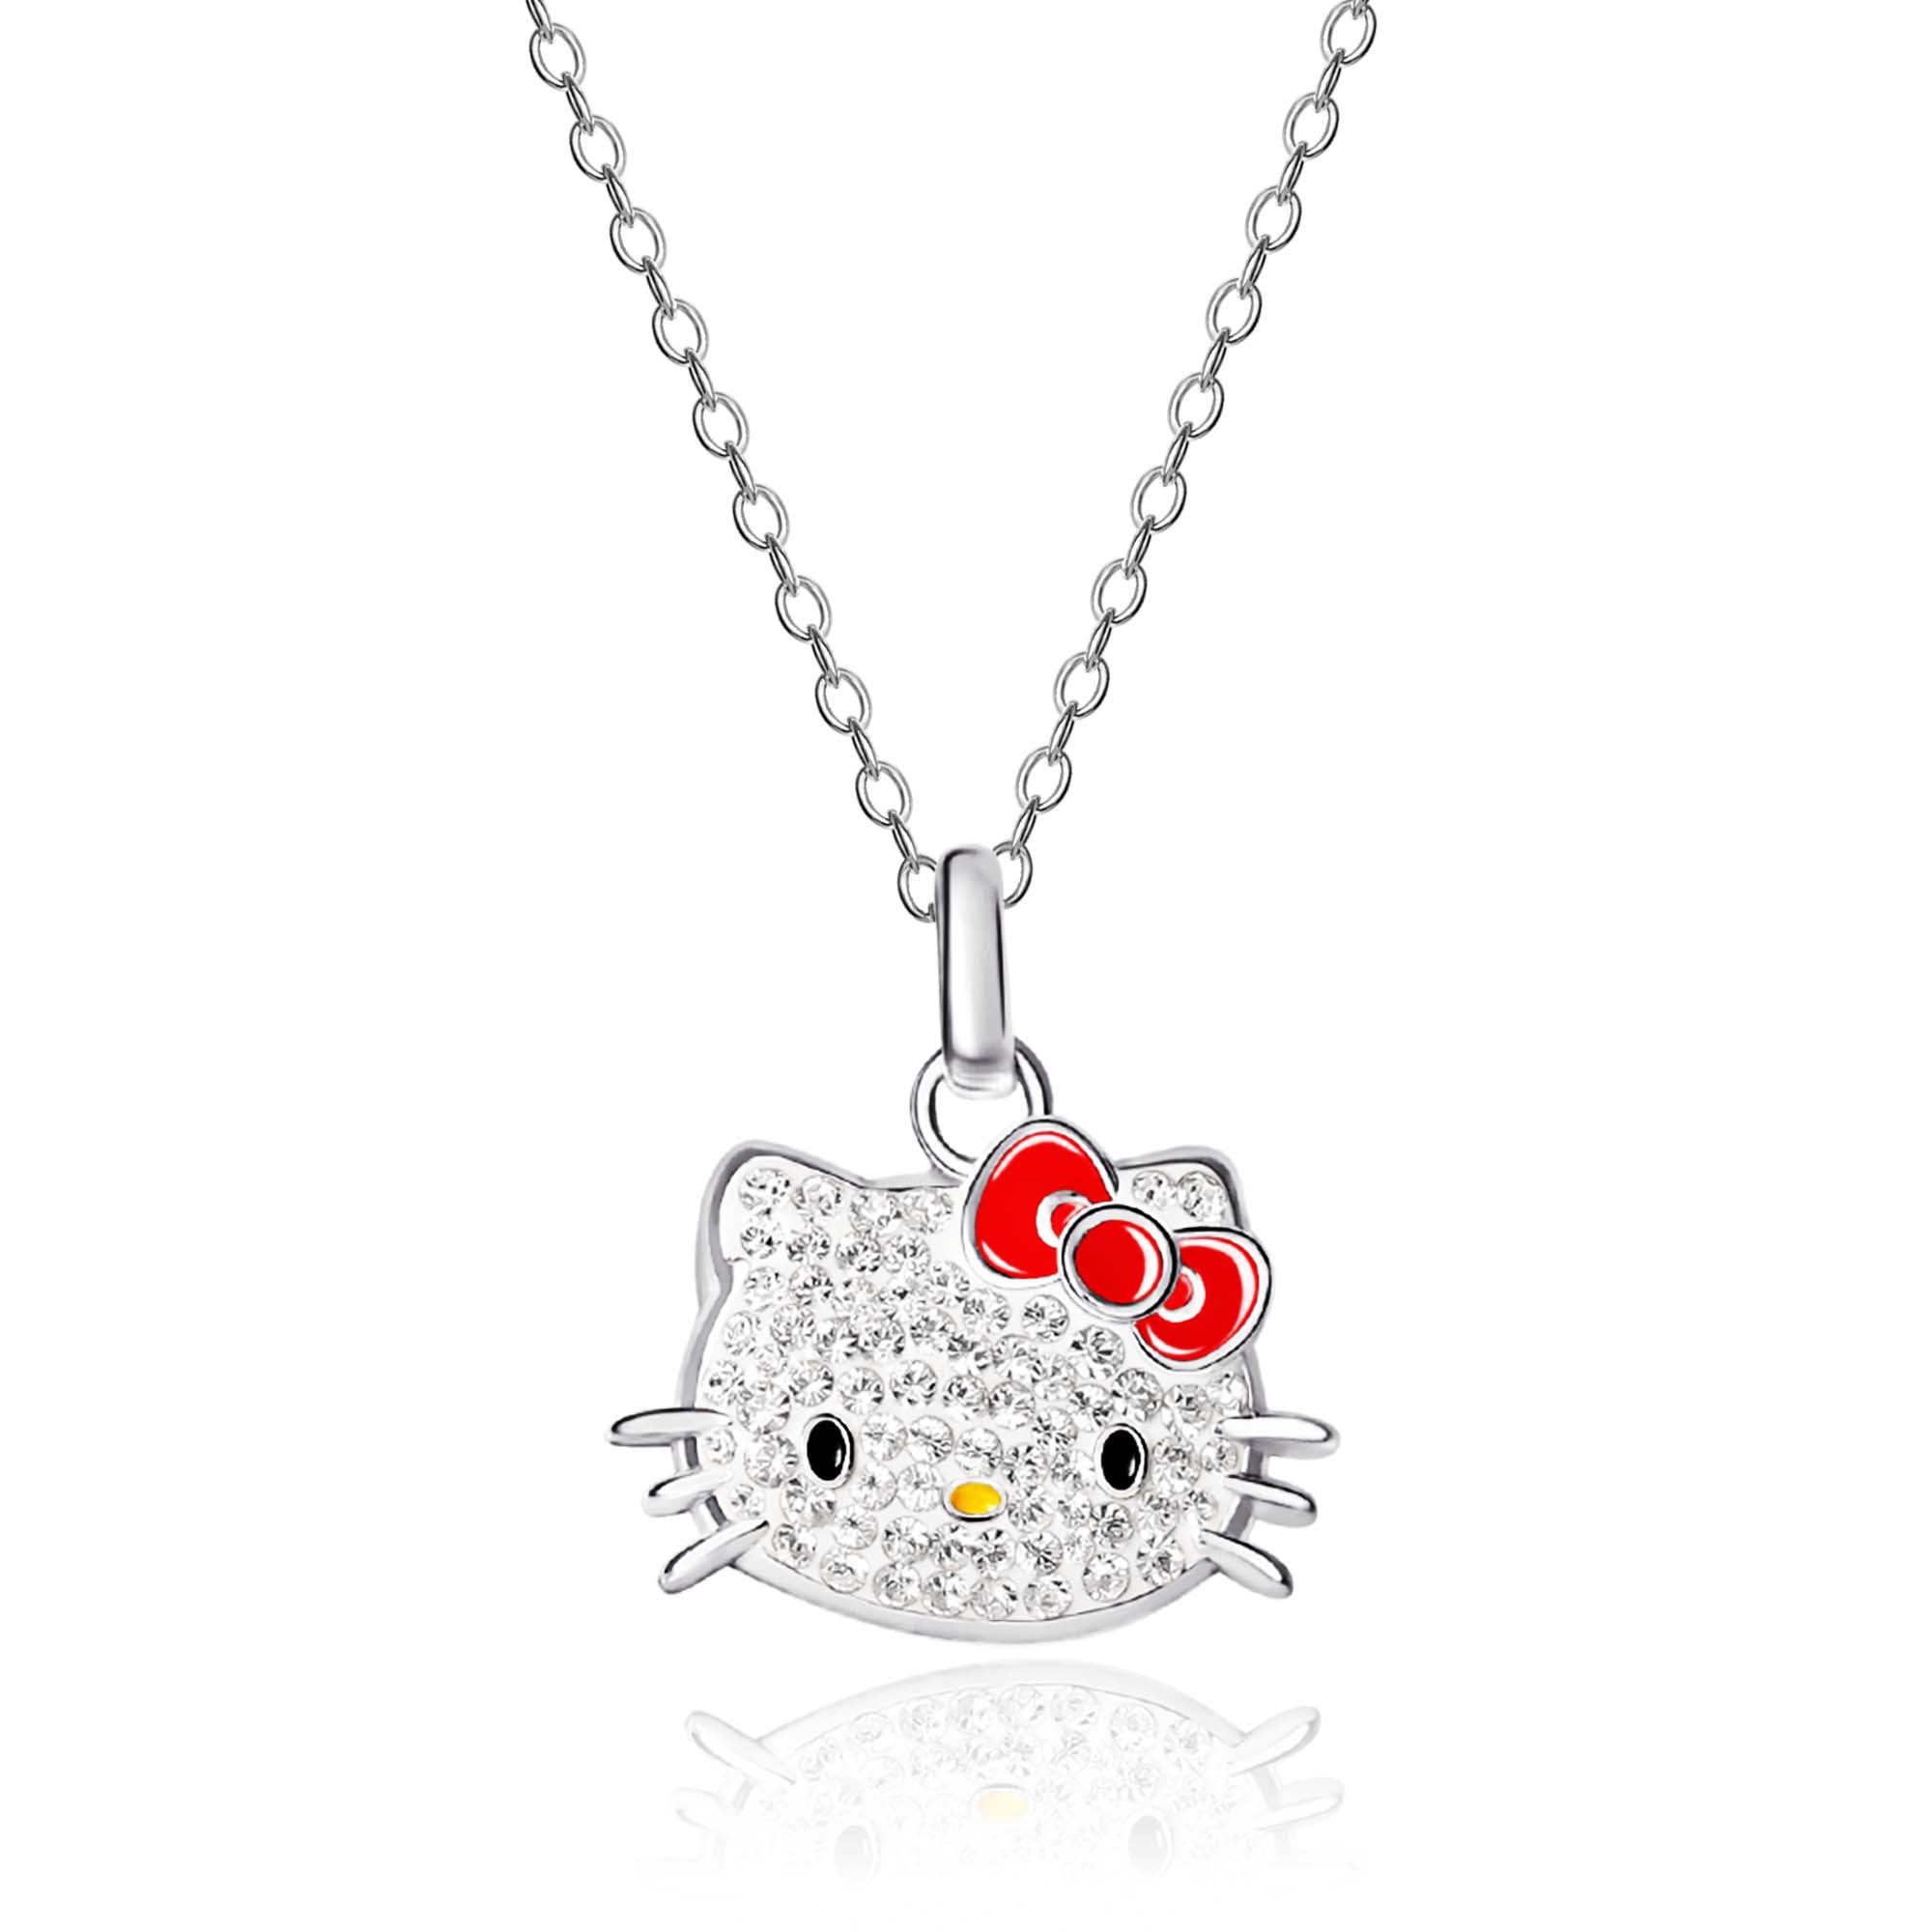 HELLO Kitty Sanrio Necklace Silver Color Single Layer Shining Bling Women  Clavicle Chain Elegant Charm Wed Pendant Jewelry Gift 